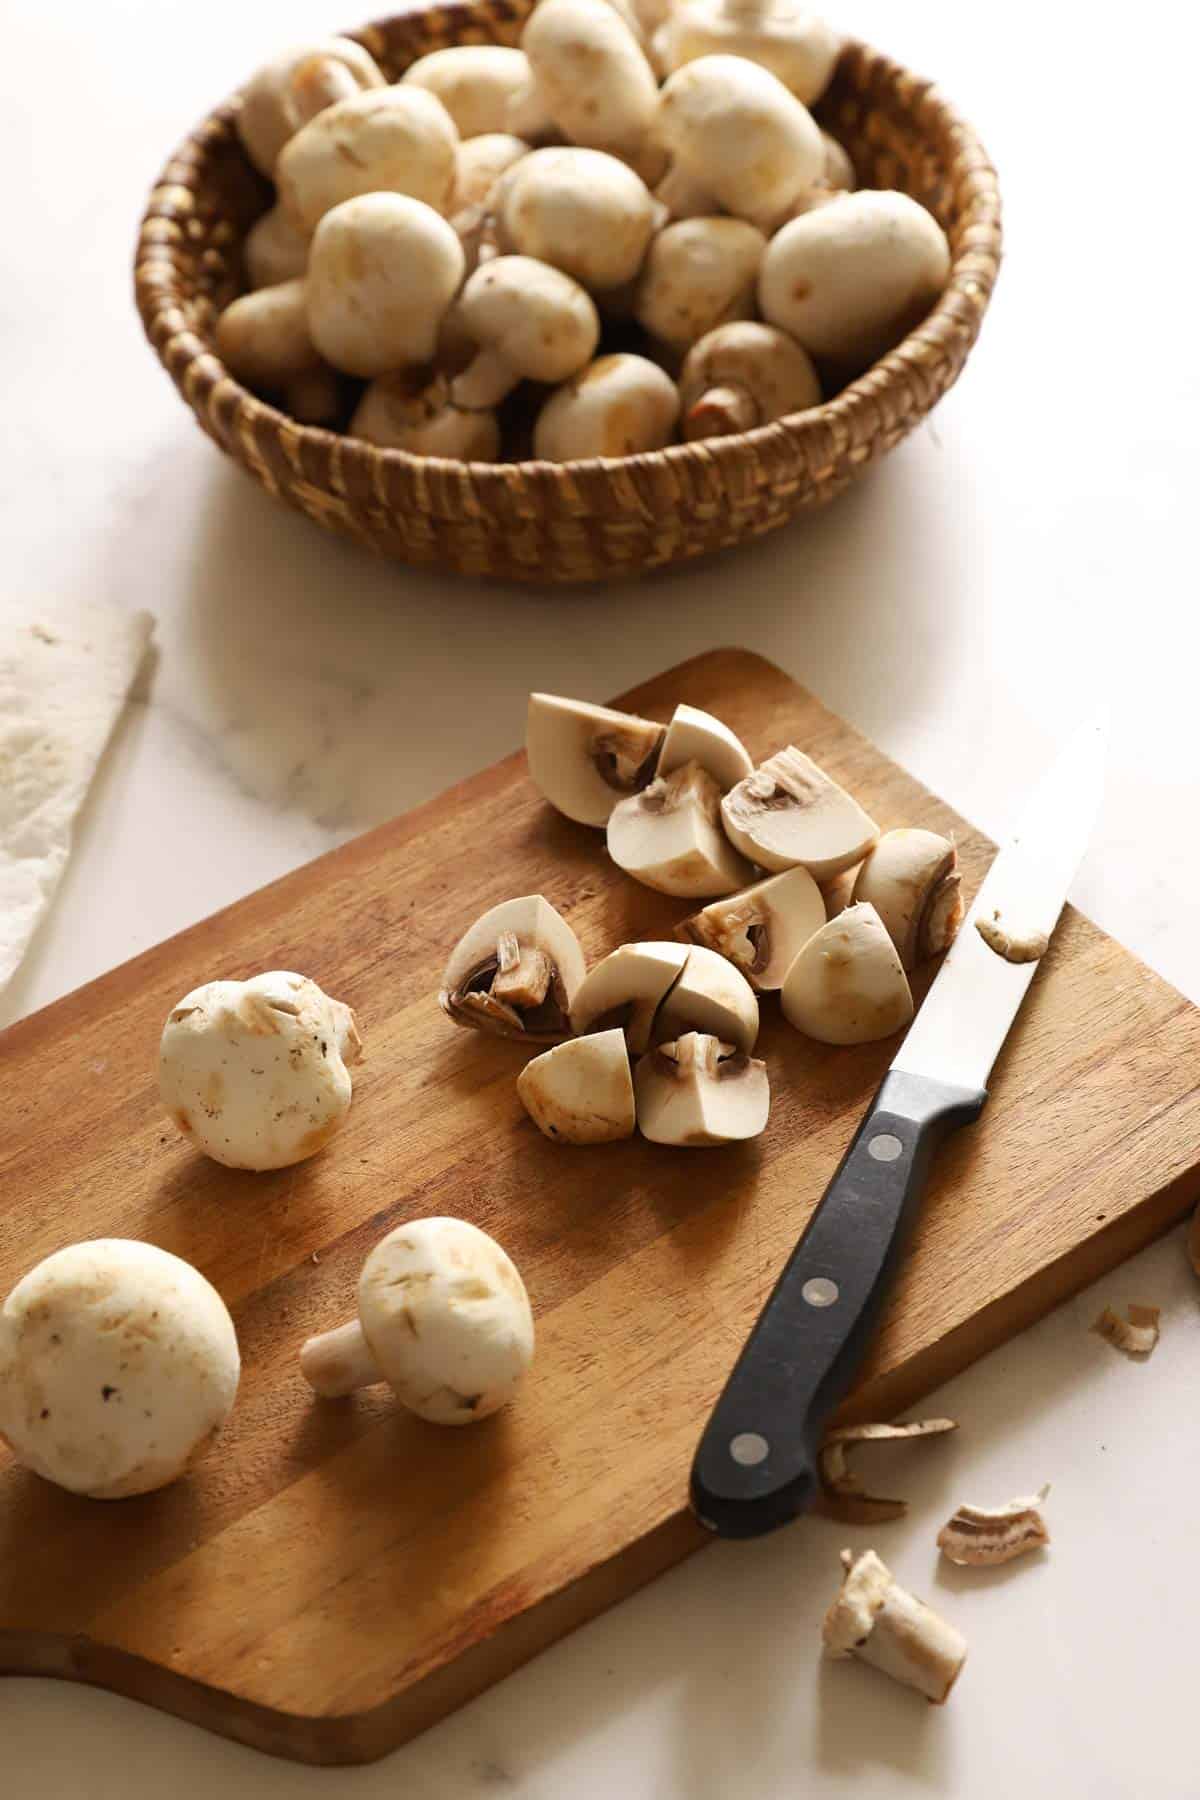 Quarter white button mushrooms for a hearty mushroom topping.